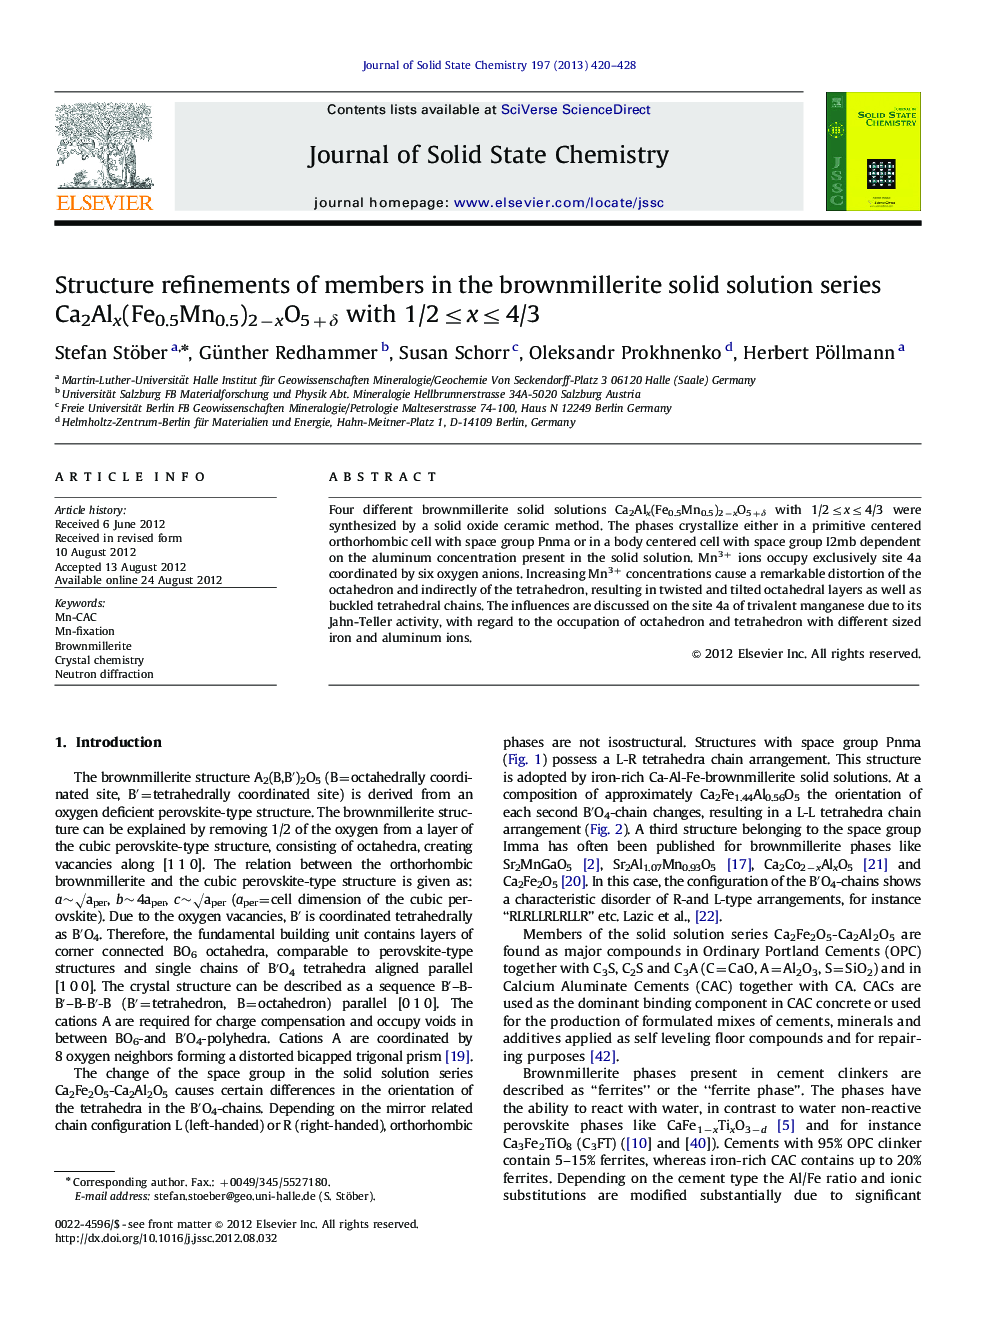 Structure refinements of members in the brownmillerite solid solution series Ca2Alx(Fe0.5Mn0.5)2−xO5+δ with 1/2≤x≤4/3